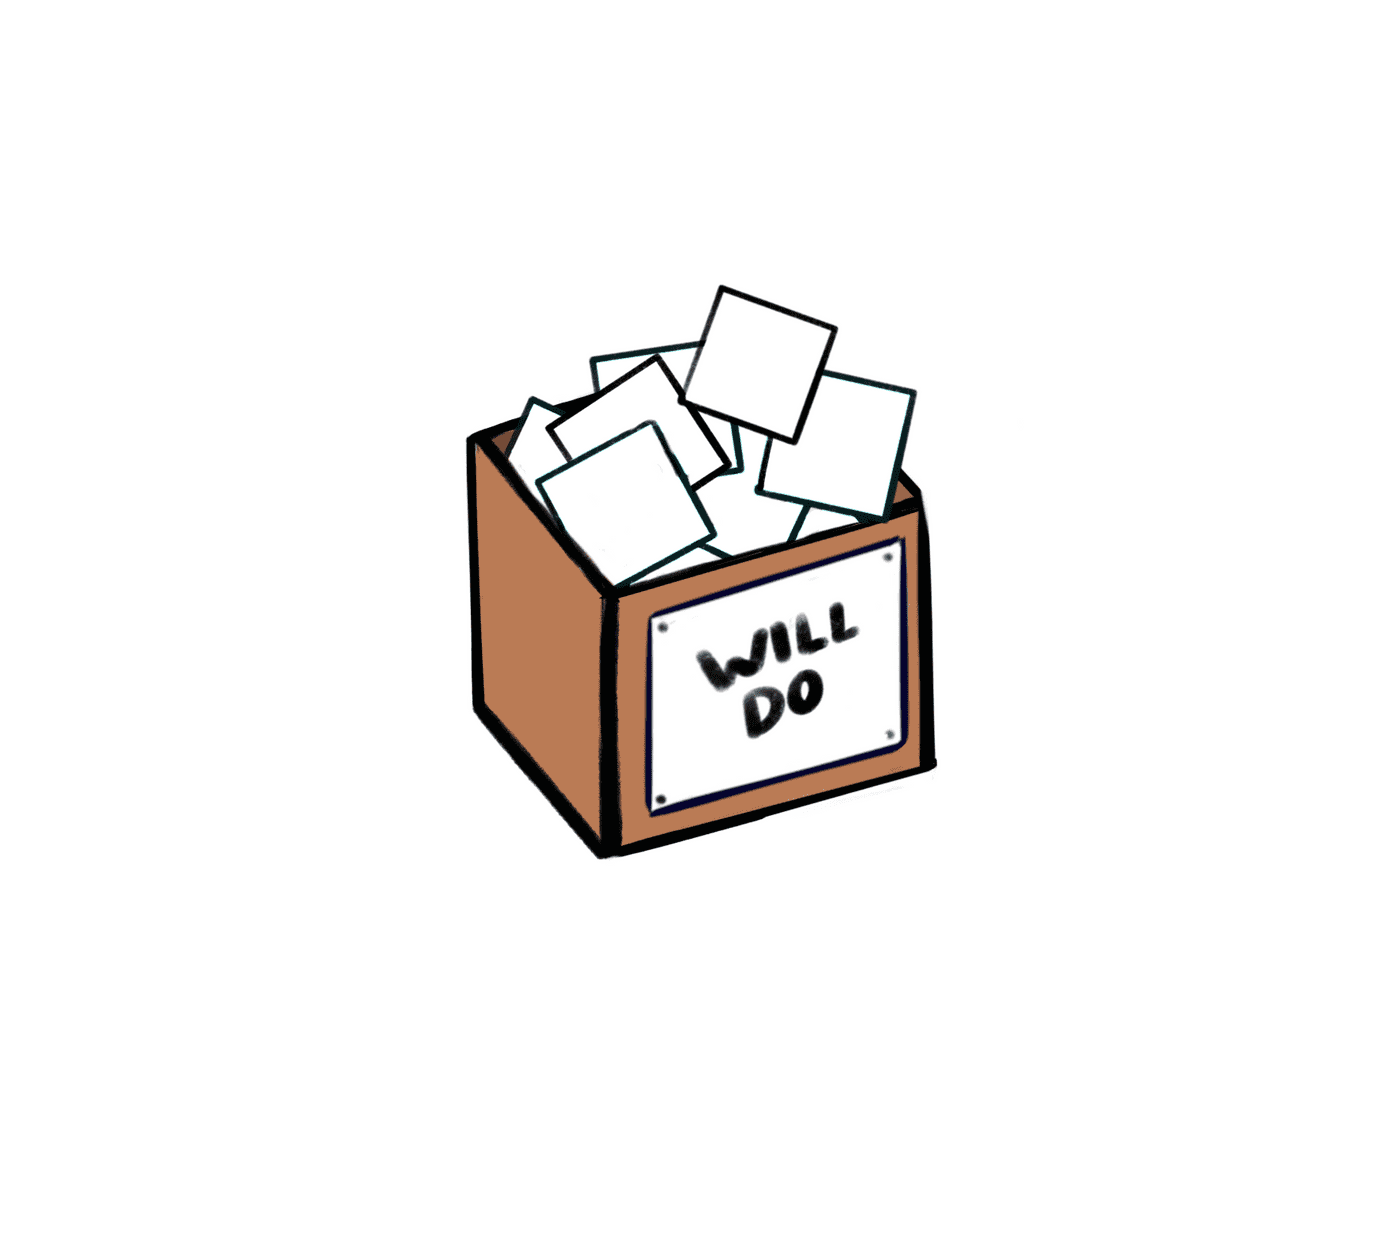 box labeled "will do" filled with white squares, suggesting empty checkboxes